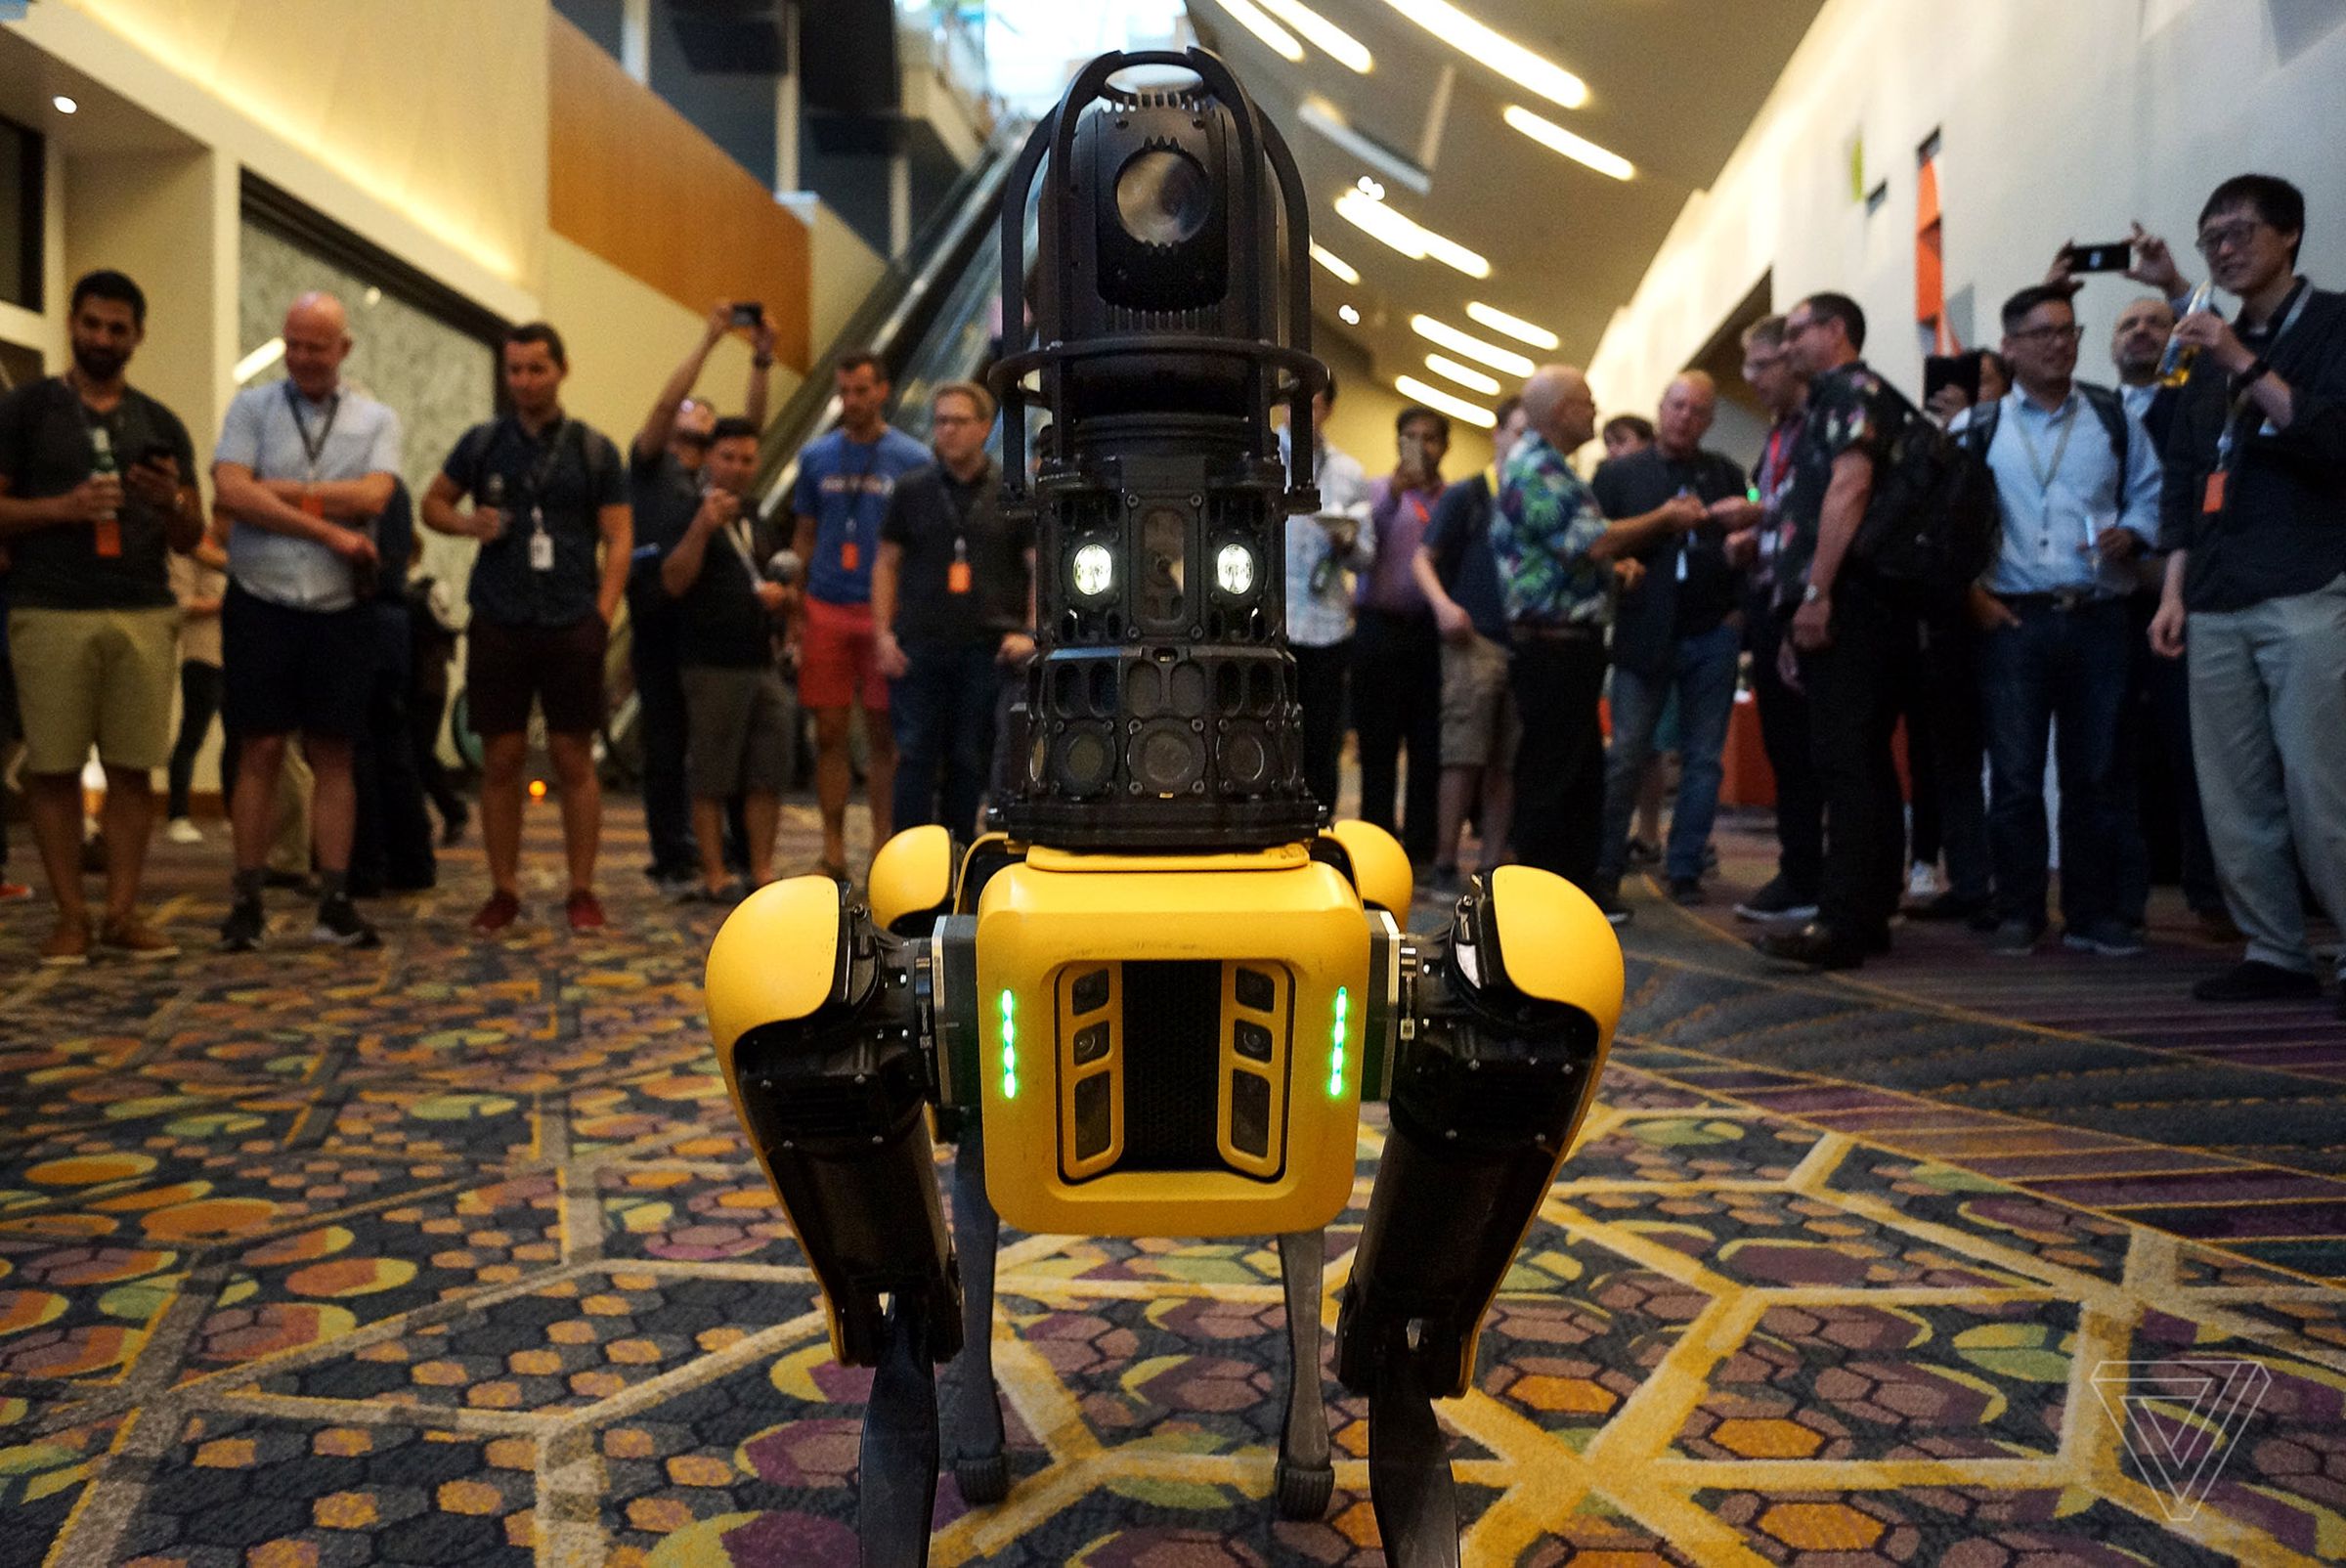 A Spot robot with a camera array at Amazon’s re:MARS conference. 